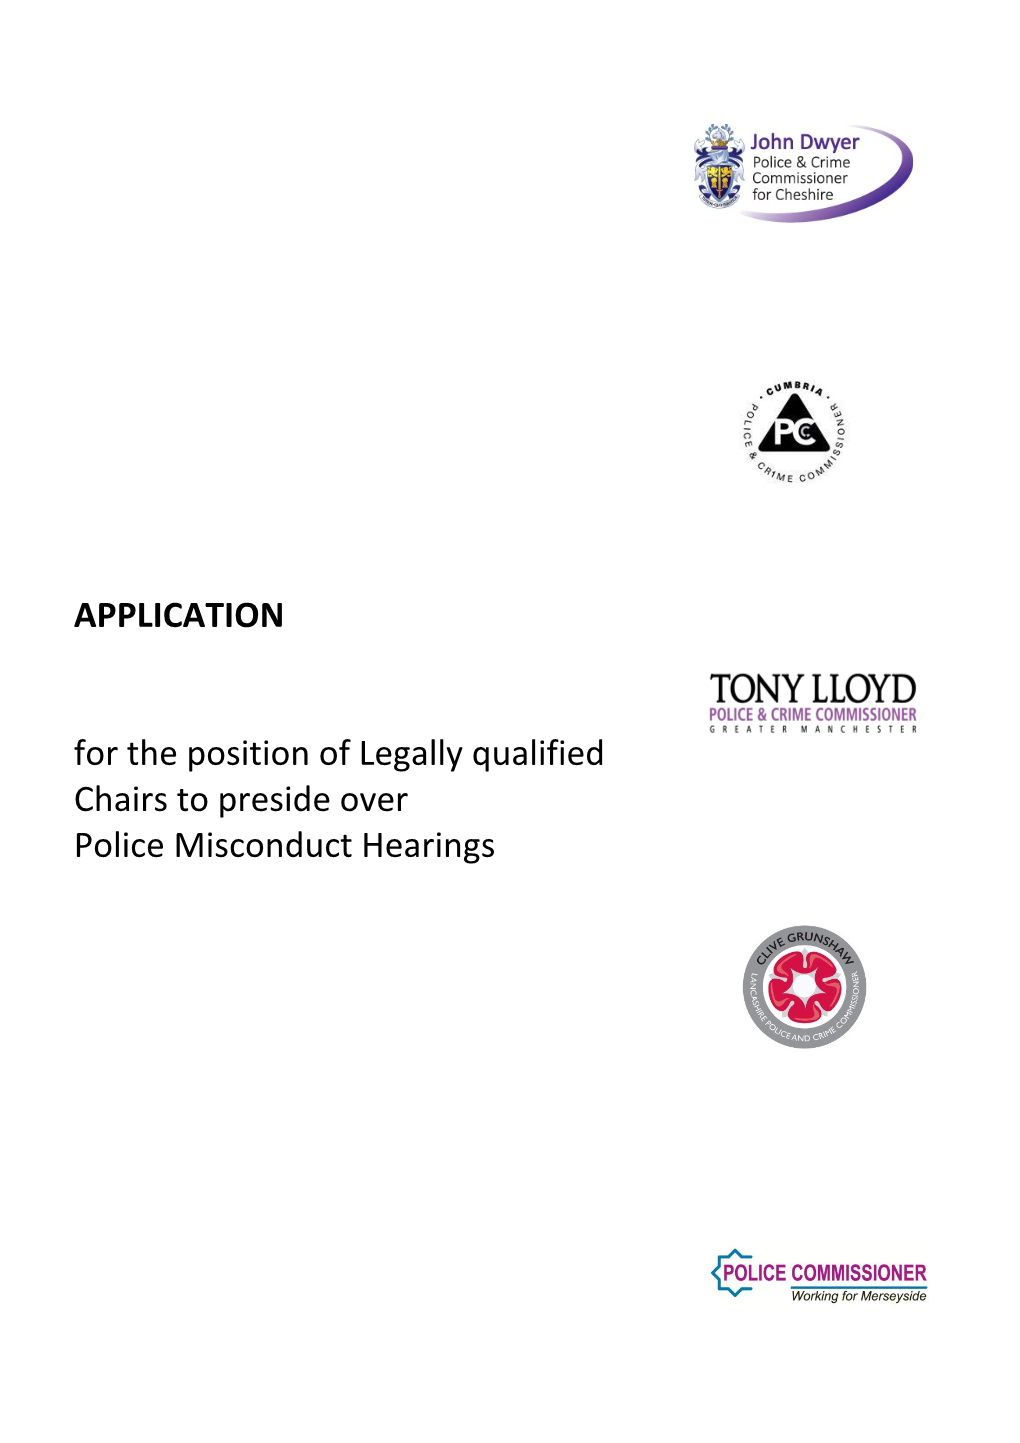 For the Position of Legally Qualified